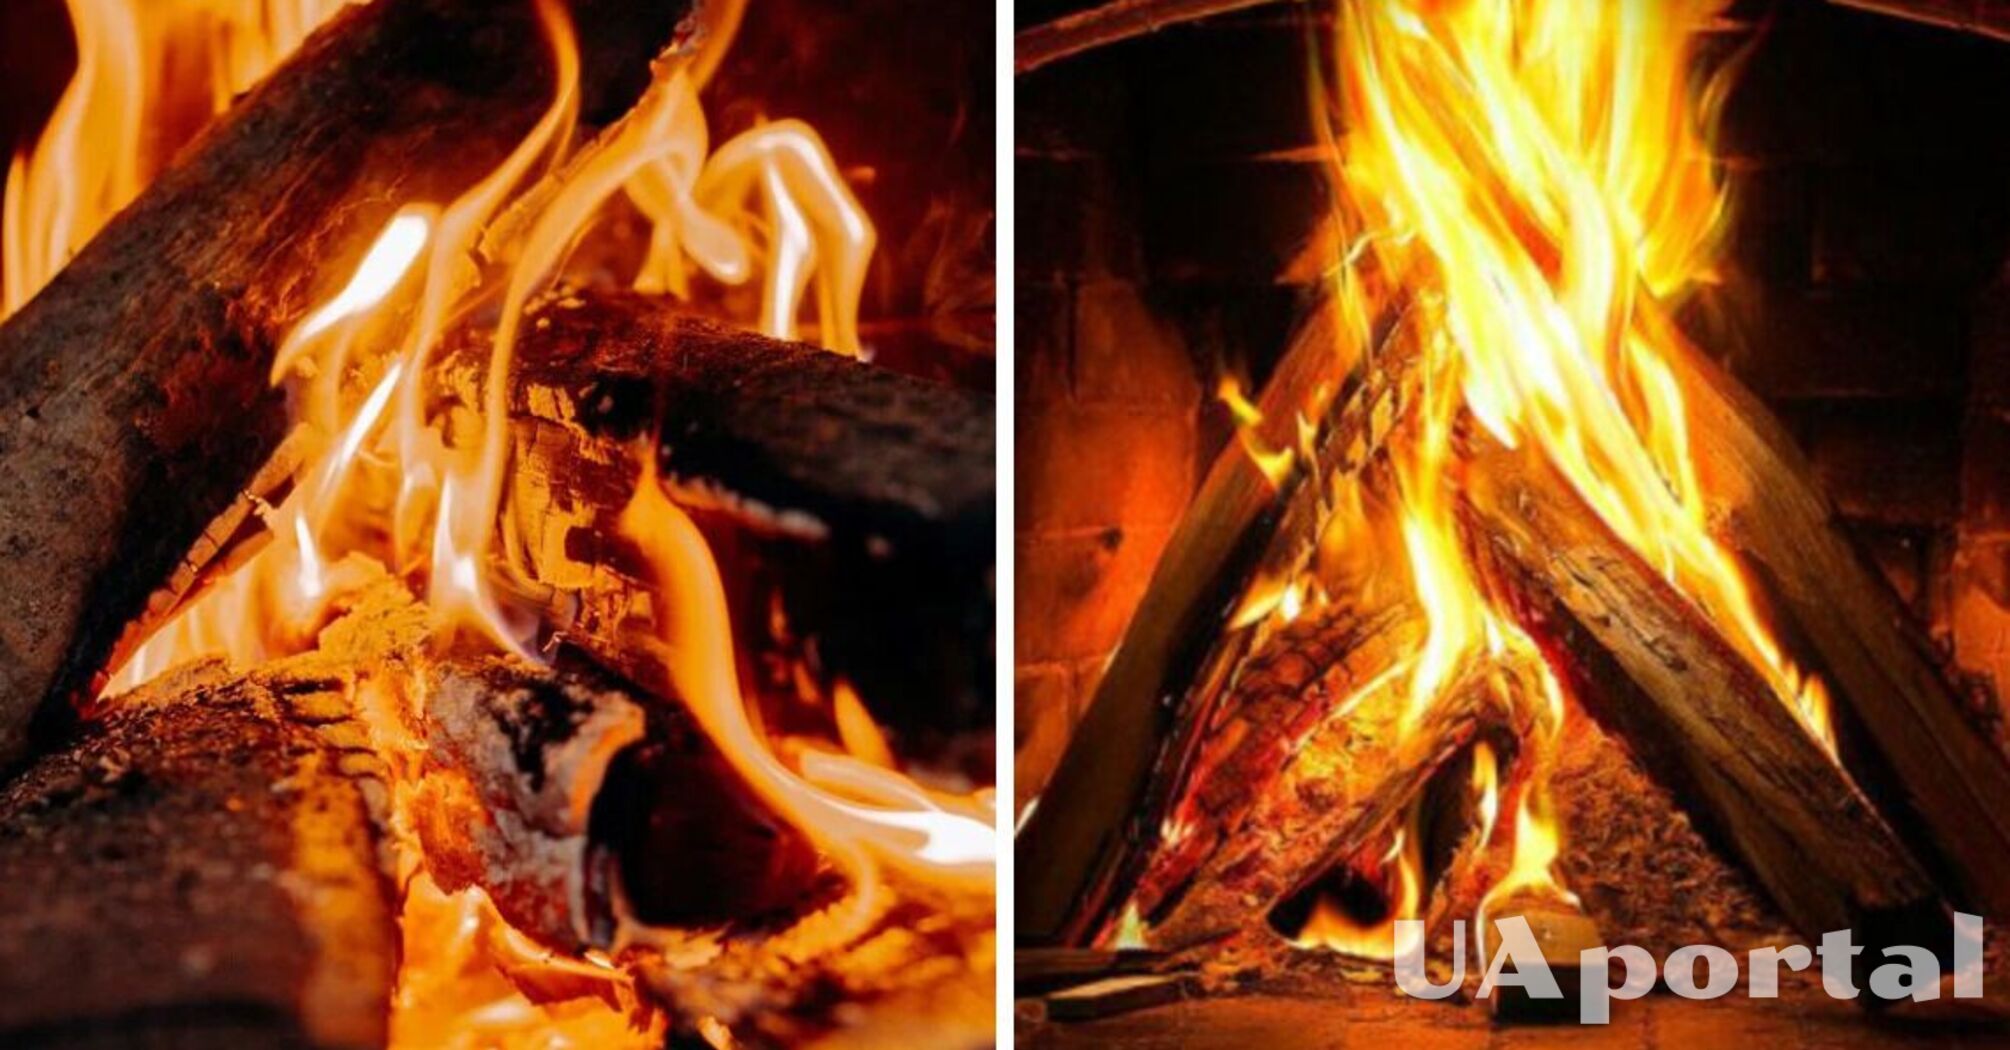 Why wood burns quickly in the stove